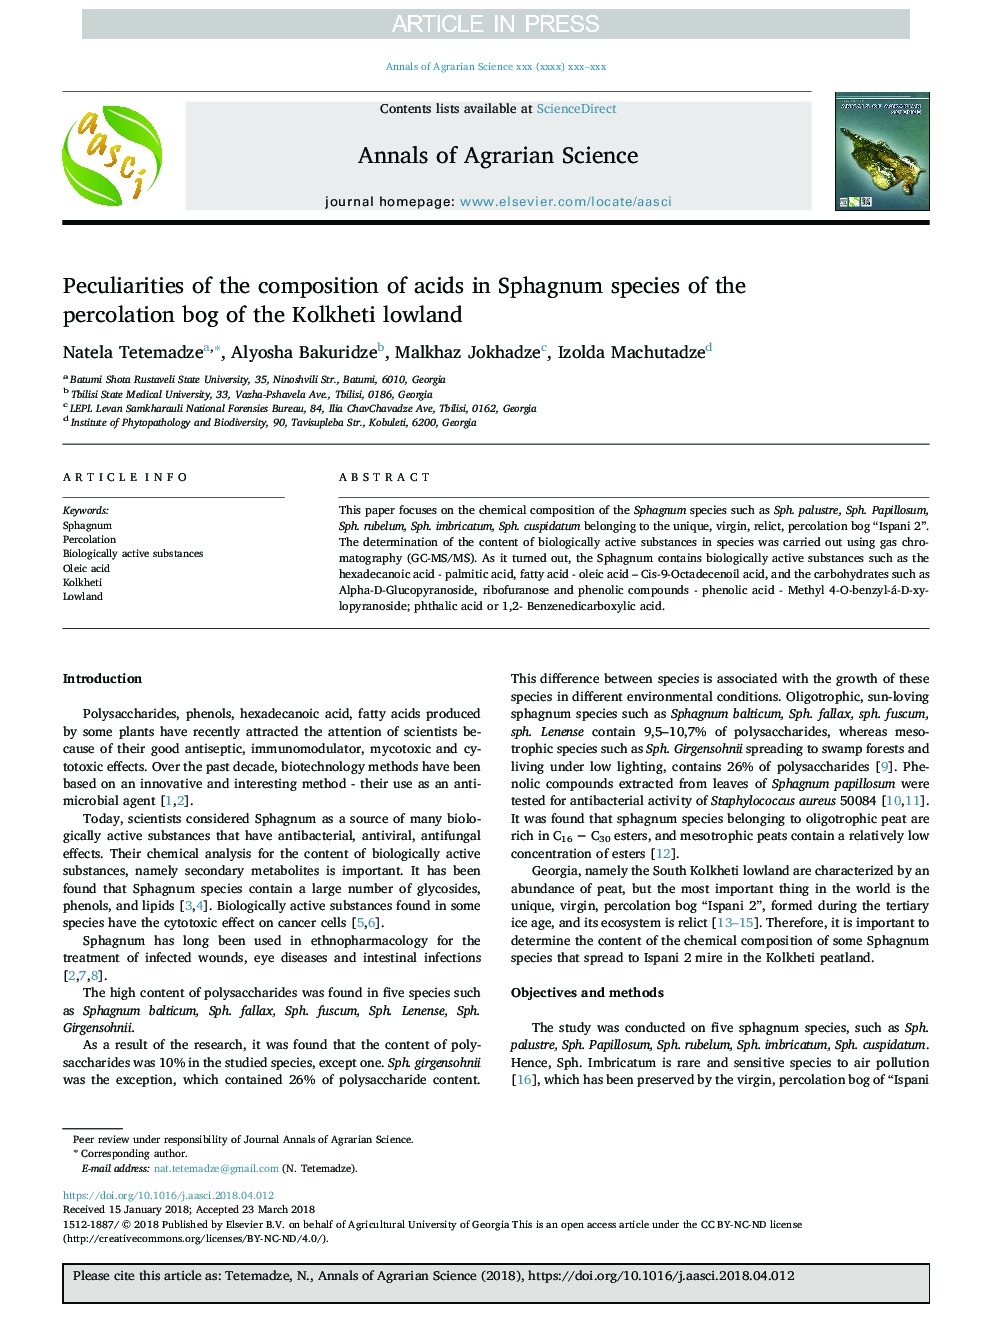 Peculiarities of the composition of acids in Sphagnum species of the percolation bog of the Kolkheti lowland